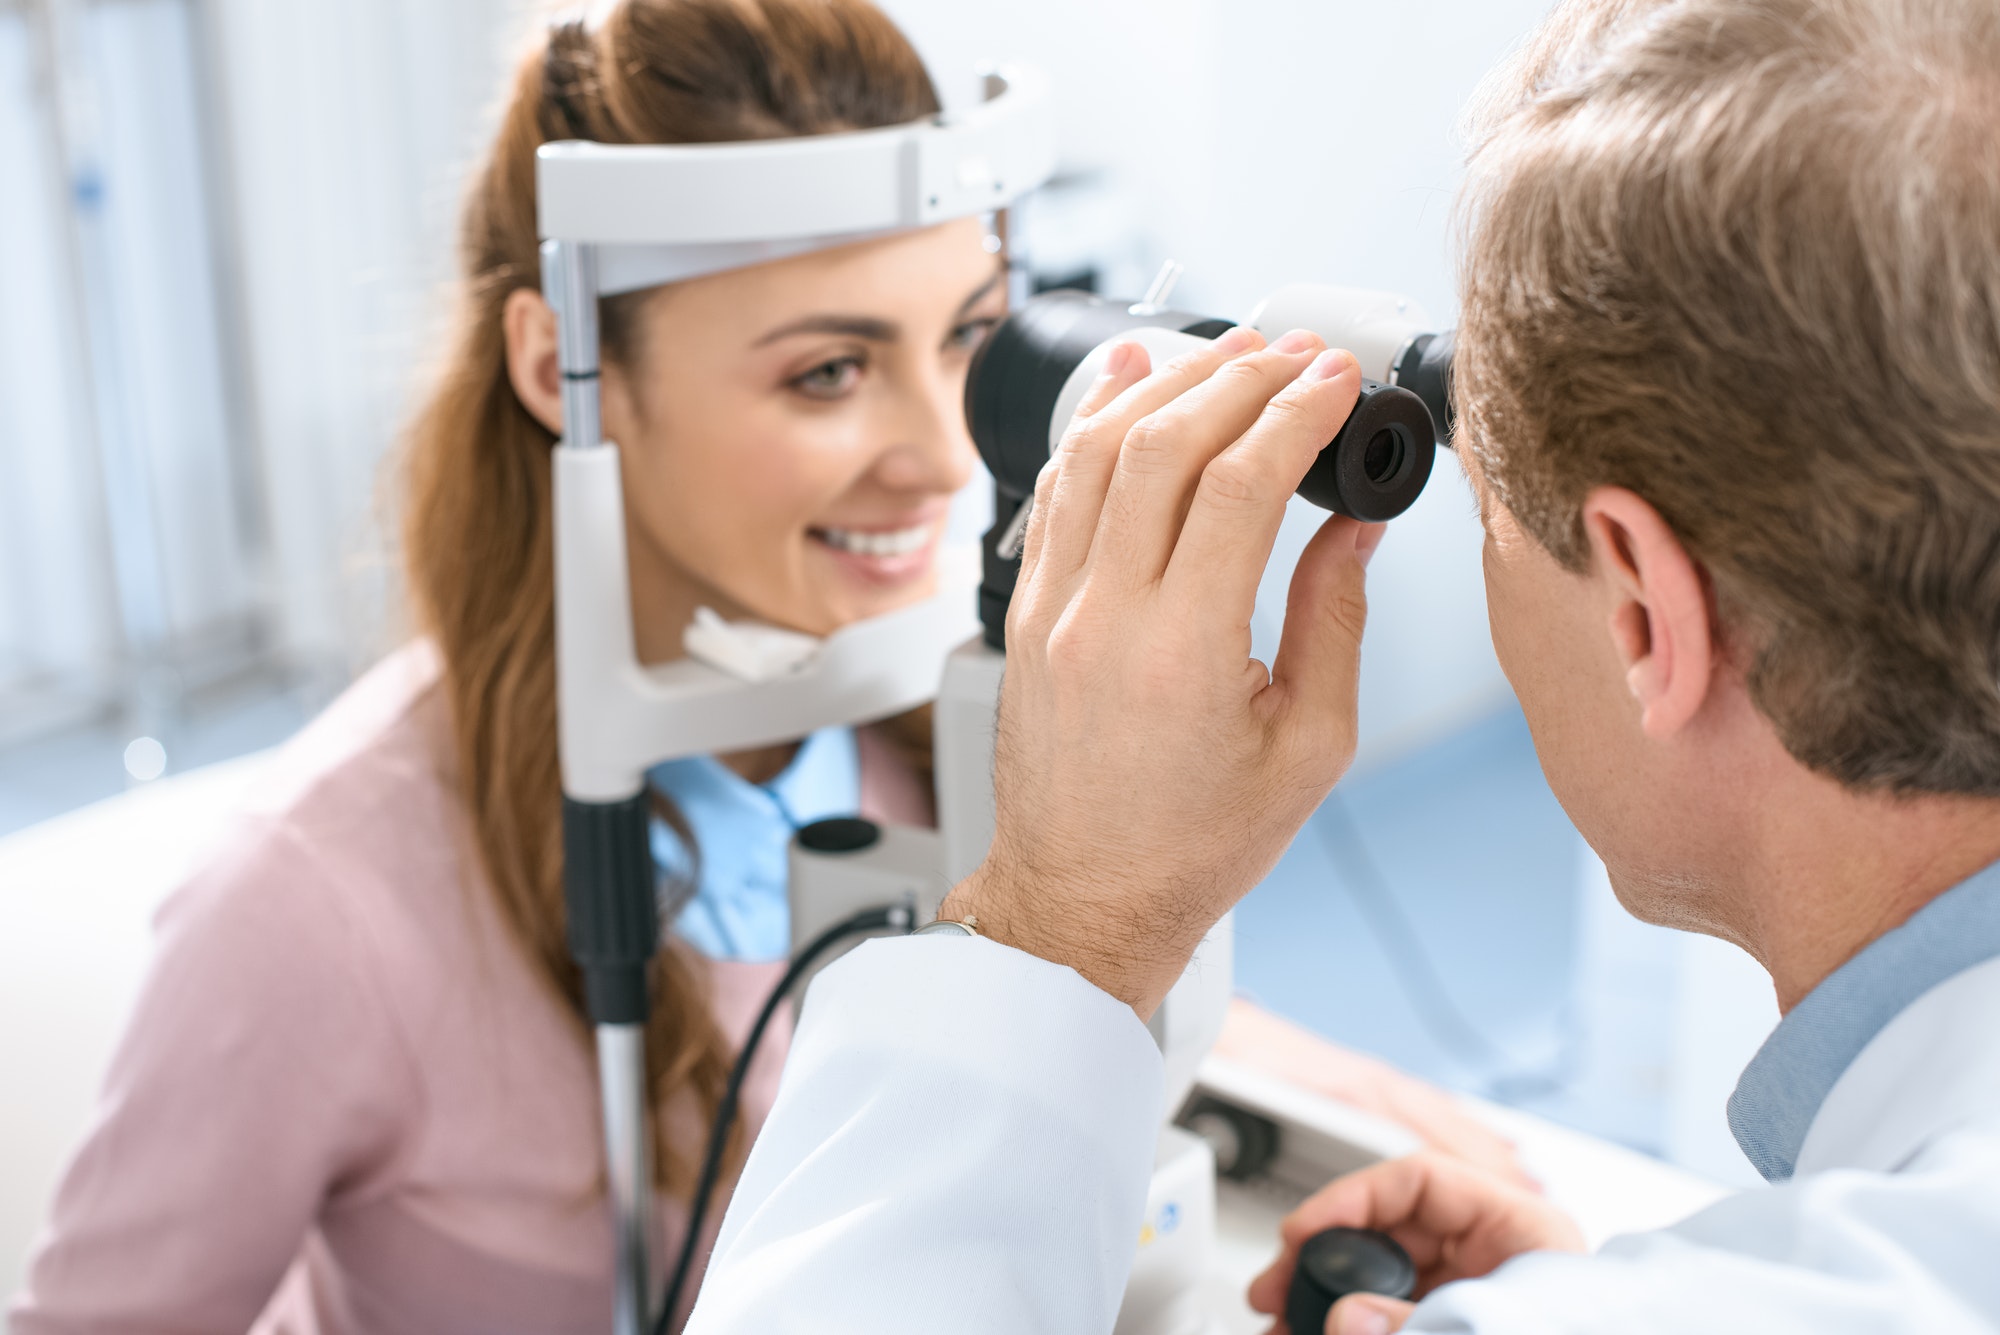 oculist-examining-patient-vision-with-slit-lamp-in-clinic.jpg